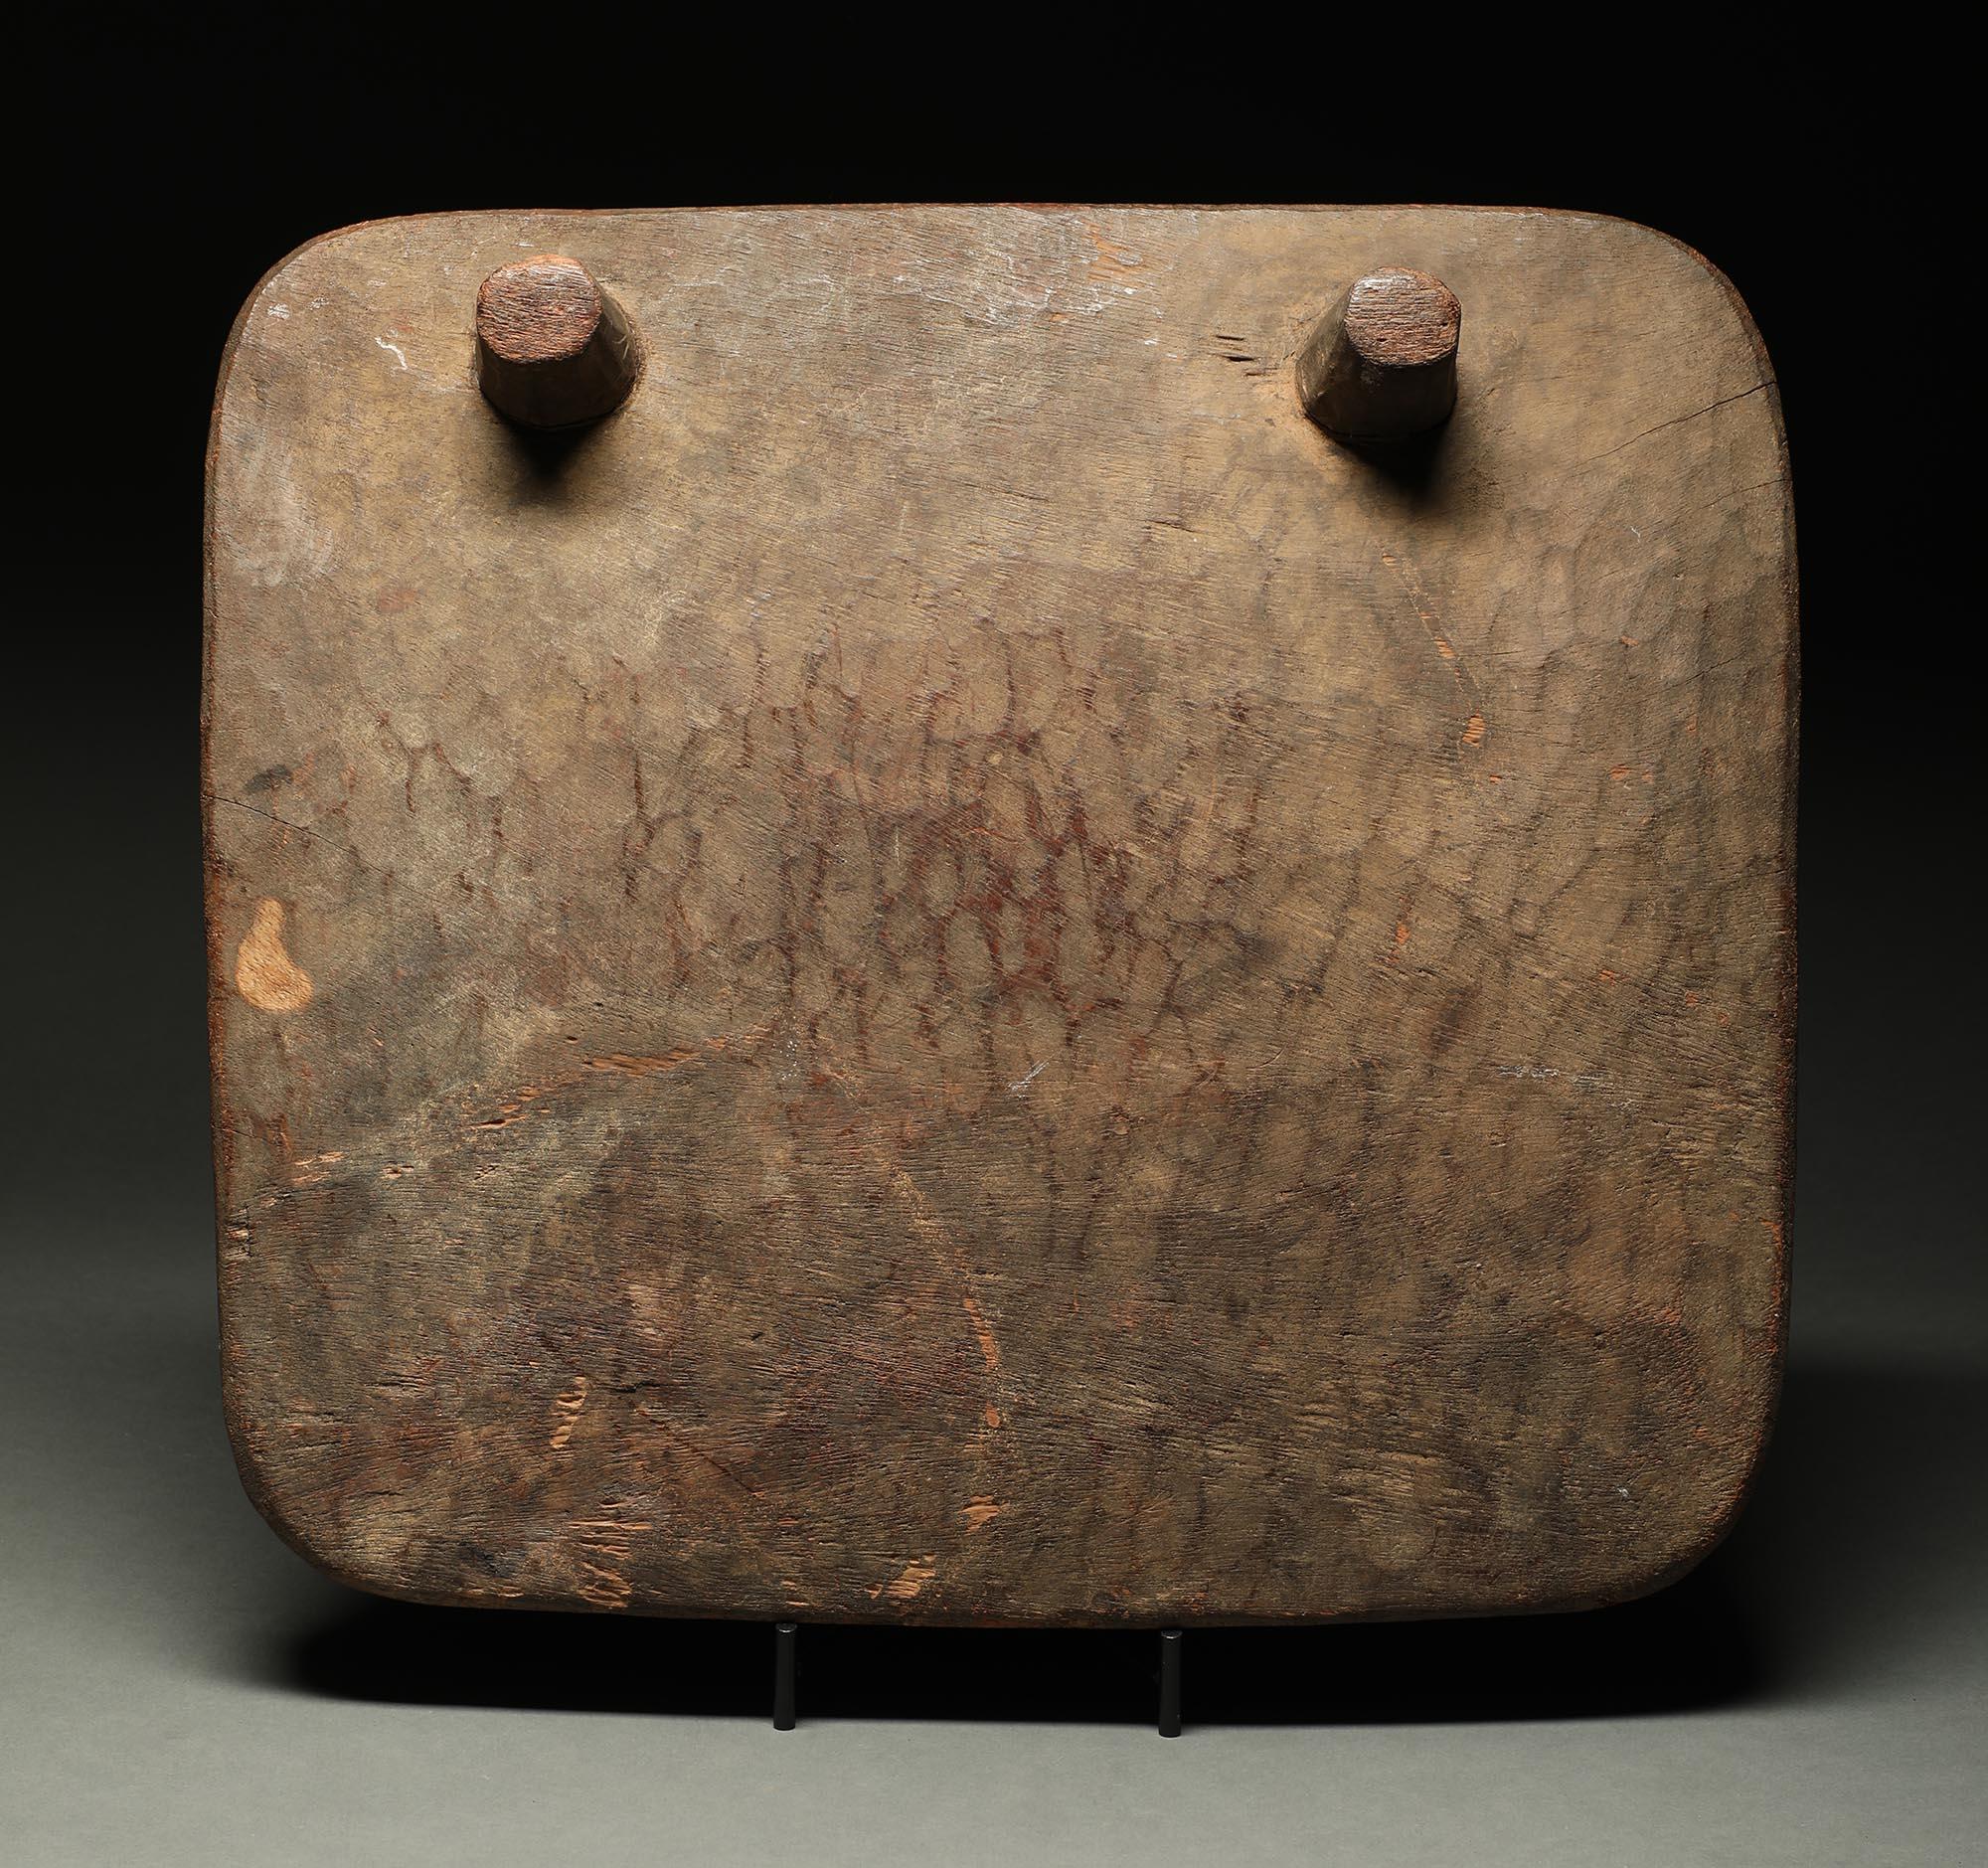 20th Century Early Yoruba Wood Divination Board with Row of Turtles, Nigeria Early 20th C